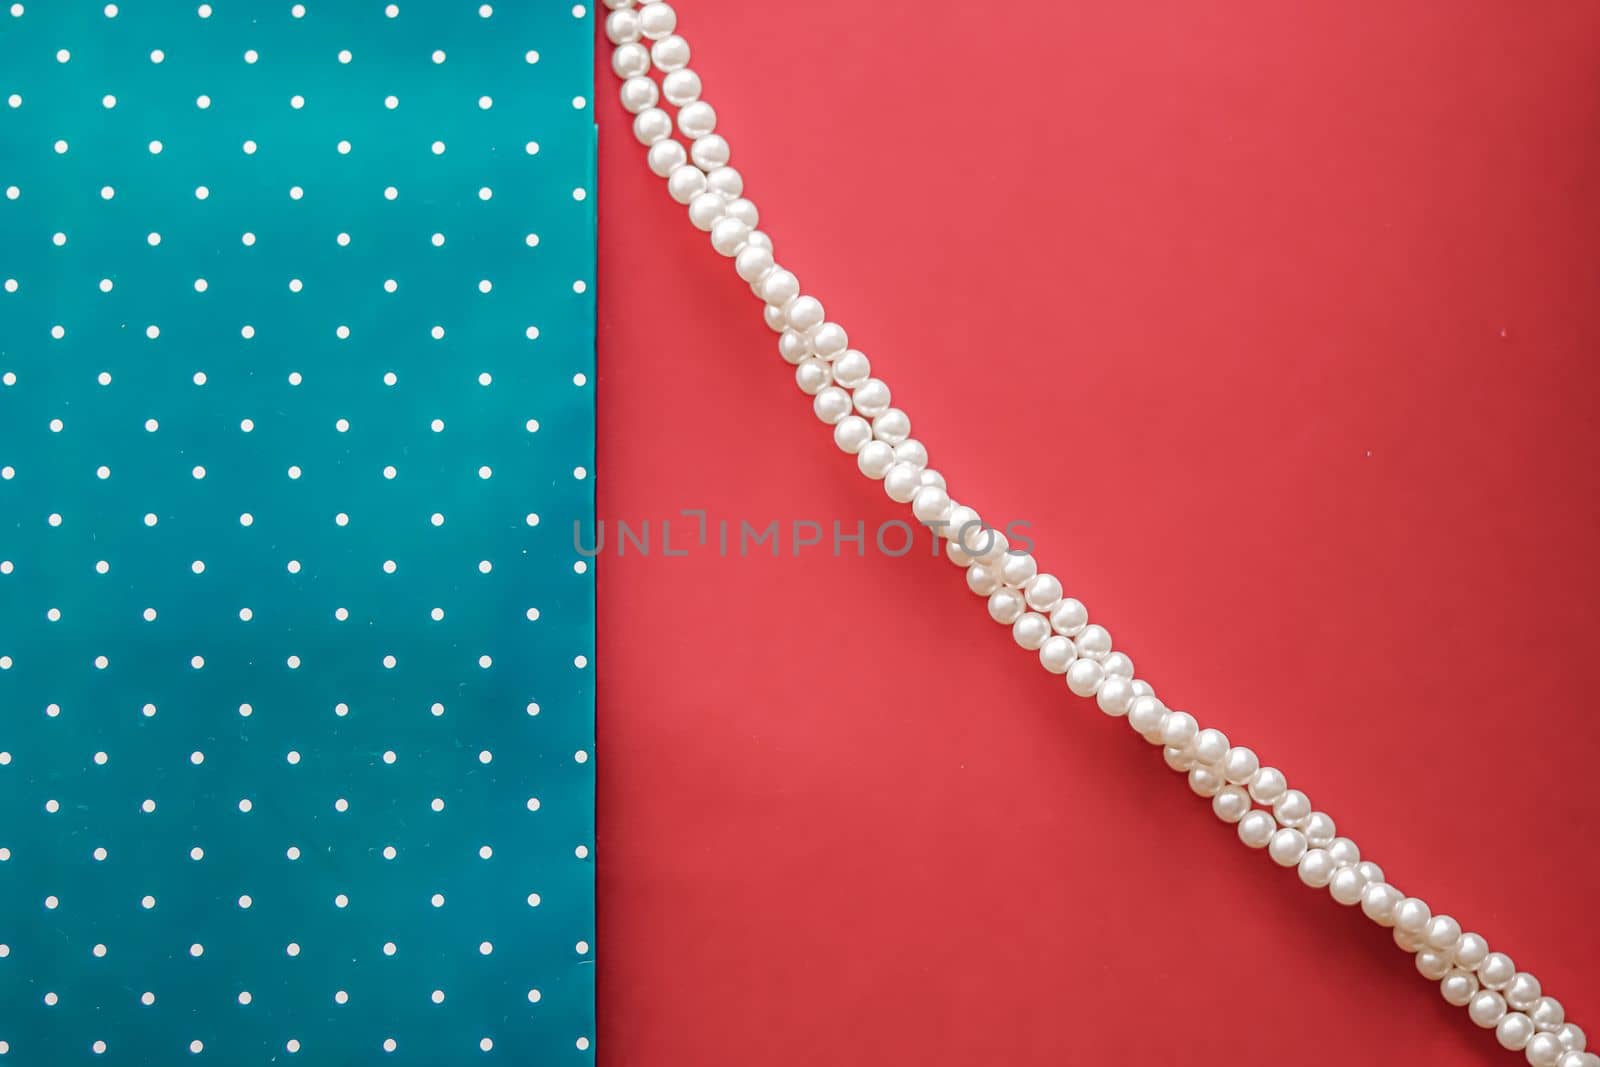 Pearl jewellery necklace and abstract blue polka dot background on coral backdrop by Anneleven